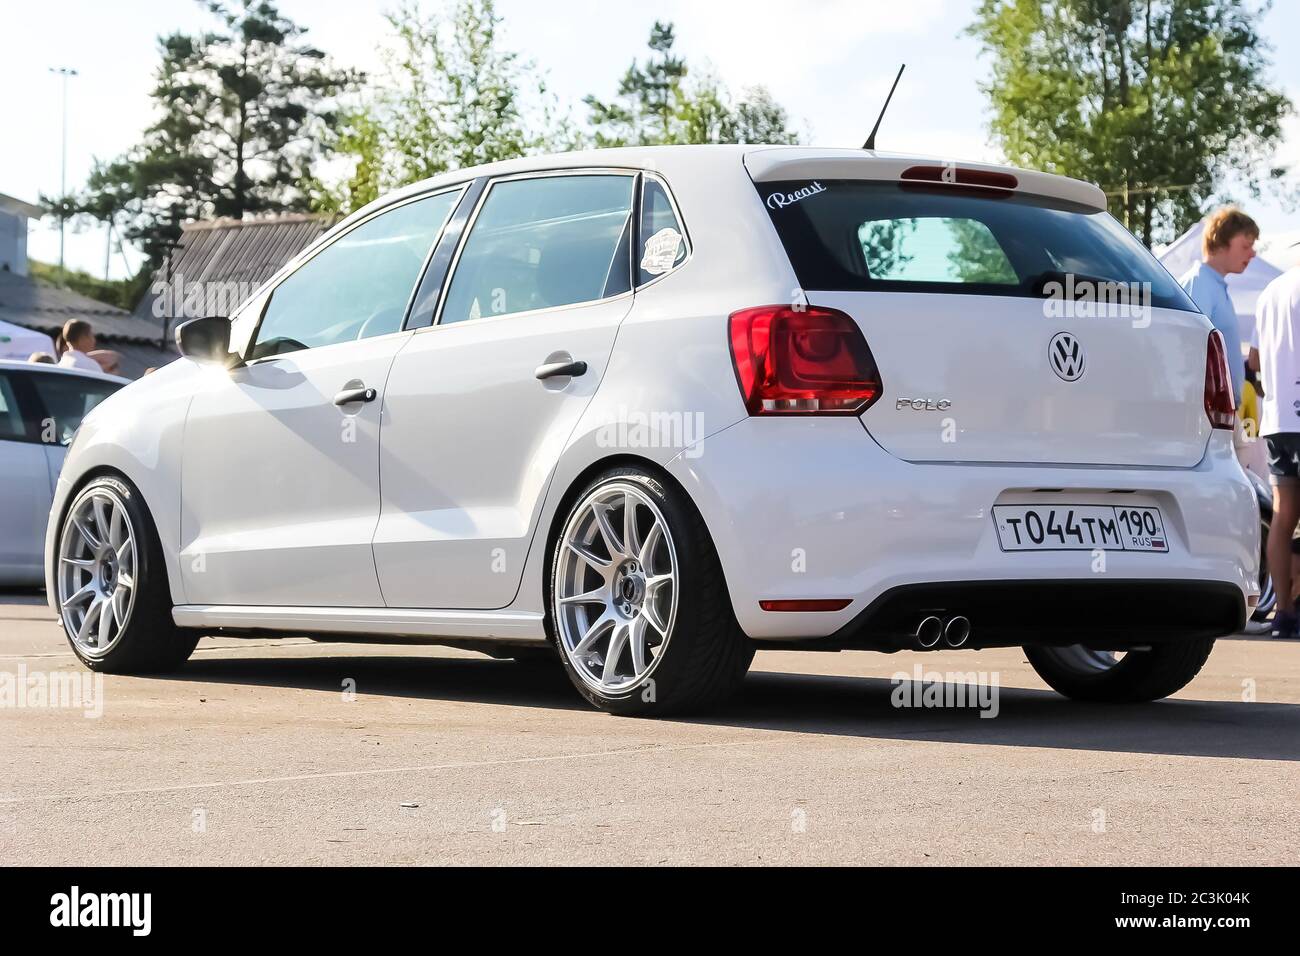 Moscow. Russia - May 20, 2019: White Volkswagen Polo mk5 Hatchback tuned  with alloy wheels XKR parked on the street Stock Photo - Alamy